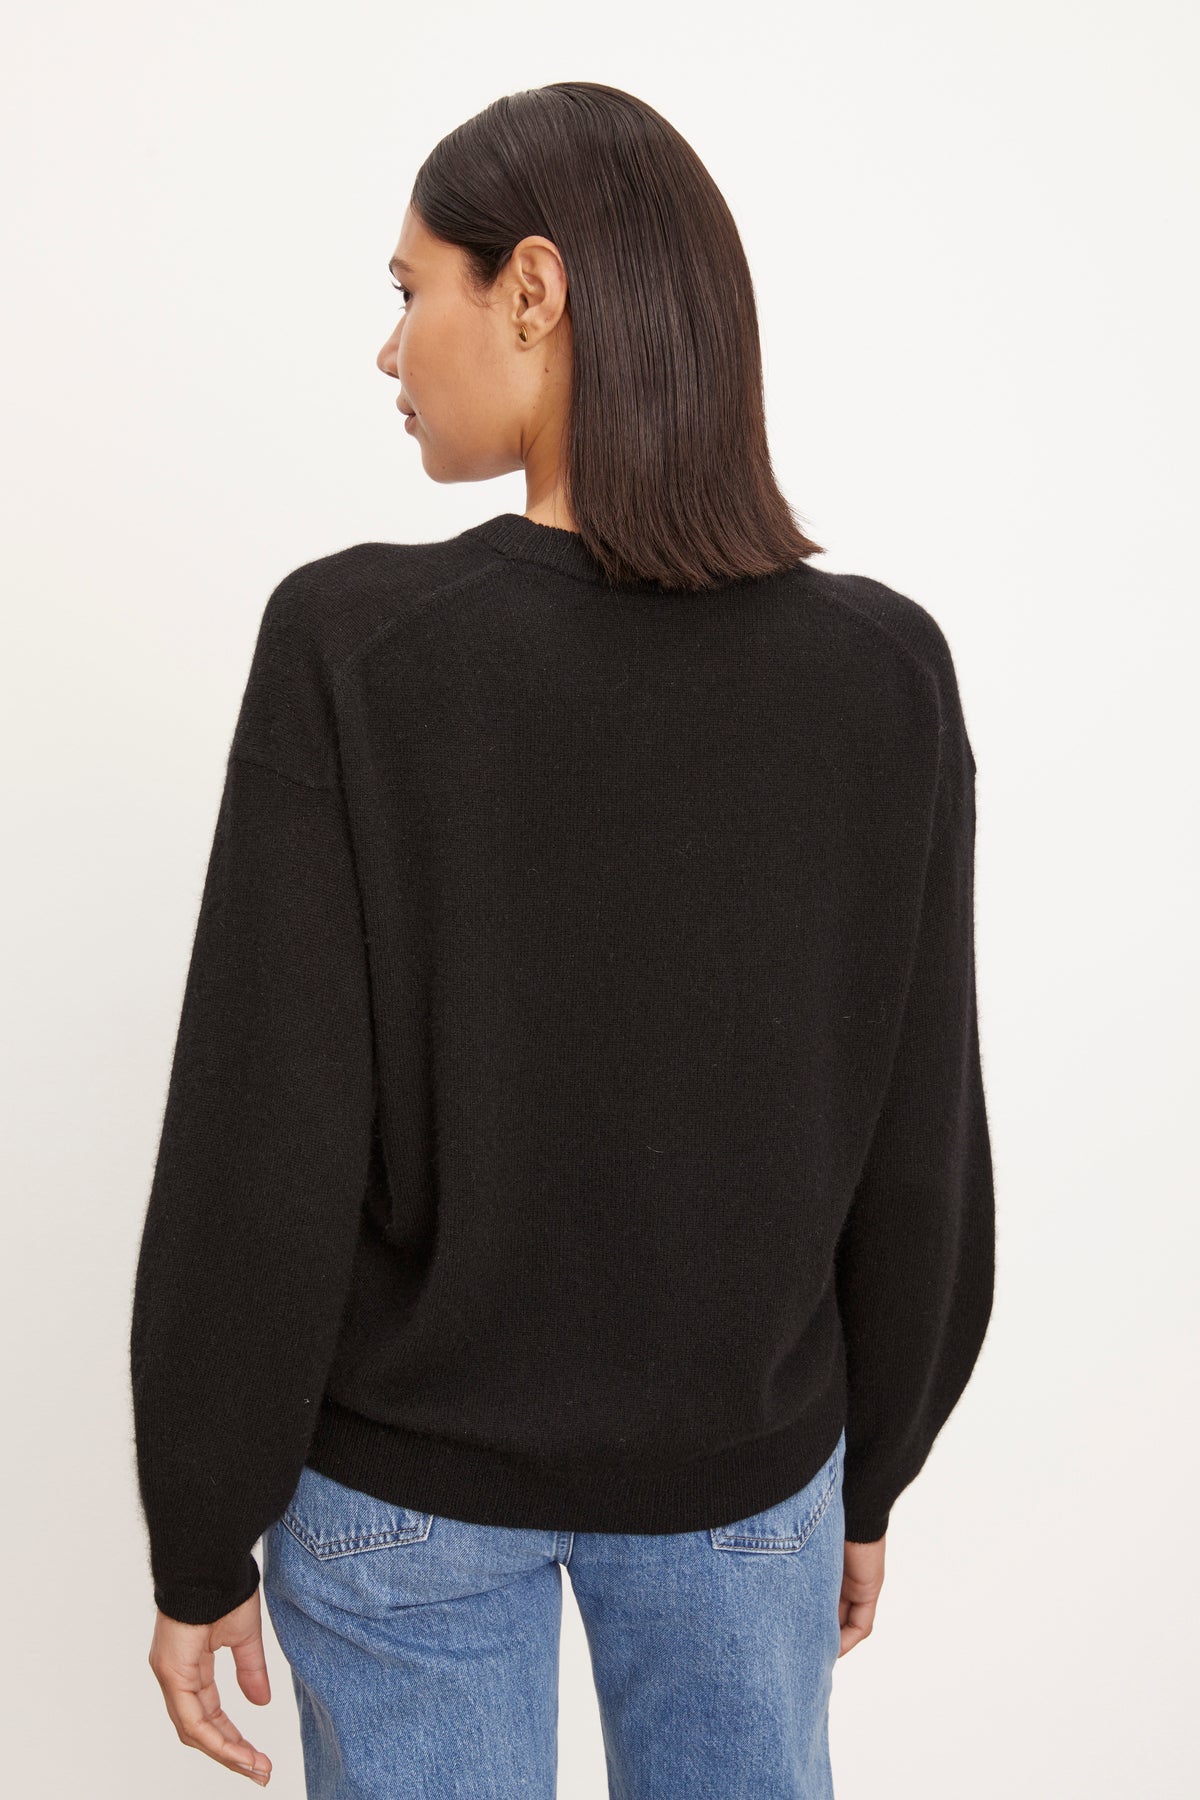   The back view of a woman wearing a Velvet by Graham & Spencer BRYNNE CASHMERE CREW NECK SWEATER and jeans. 